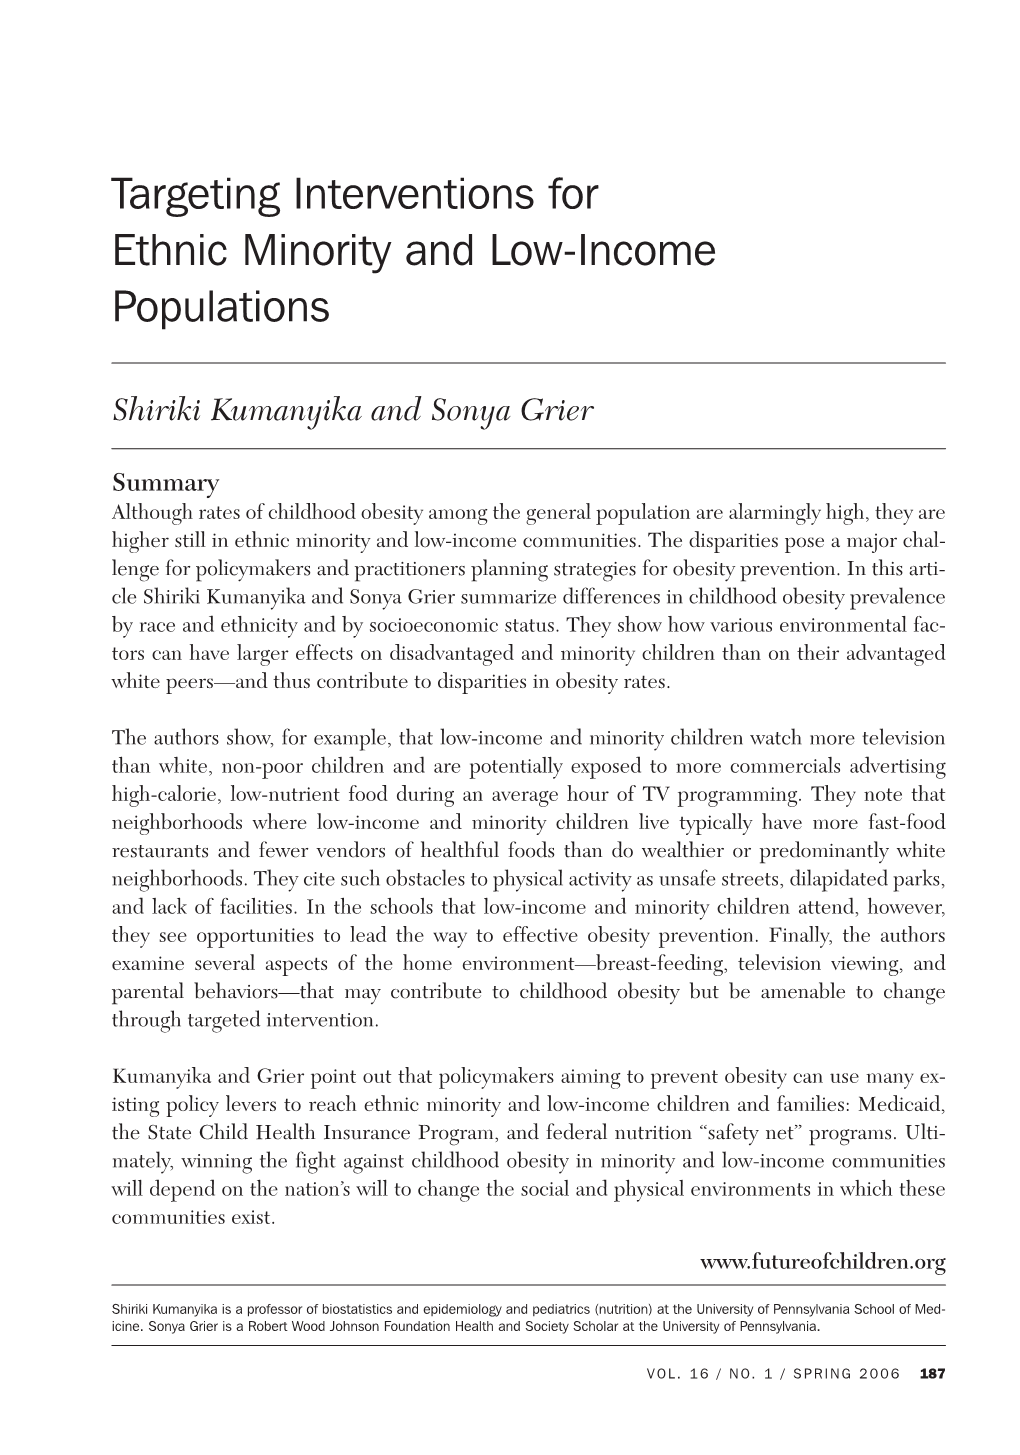 Targeting Interventions for Ethnic Minority and Low-Income Populations